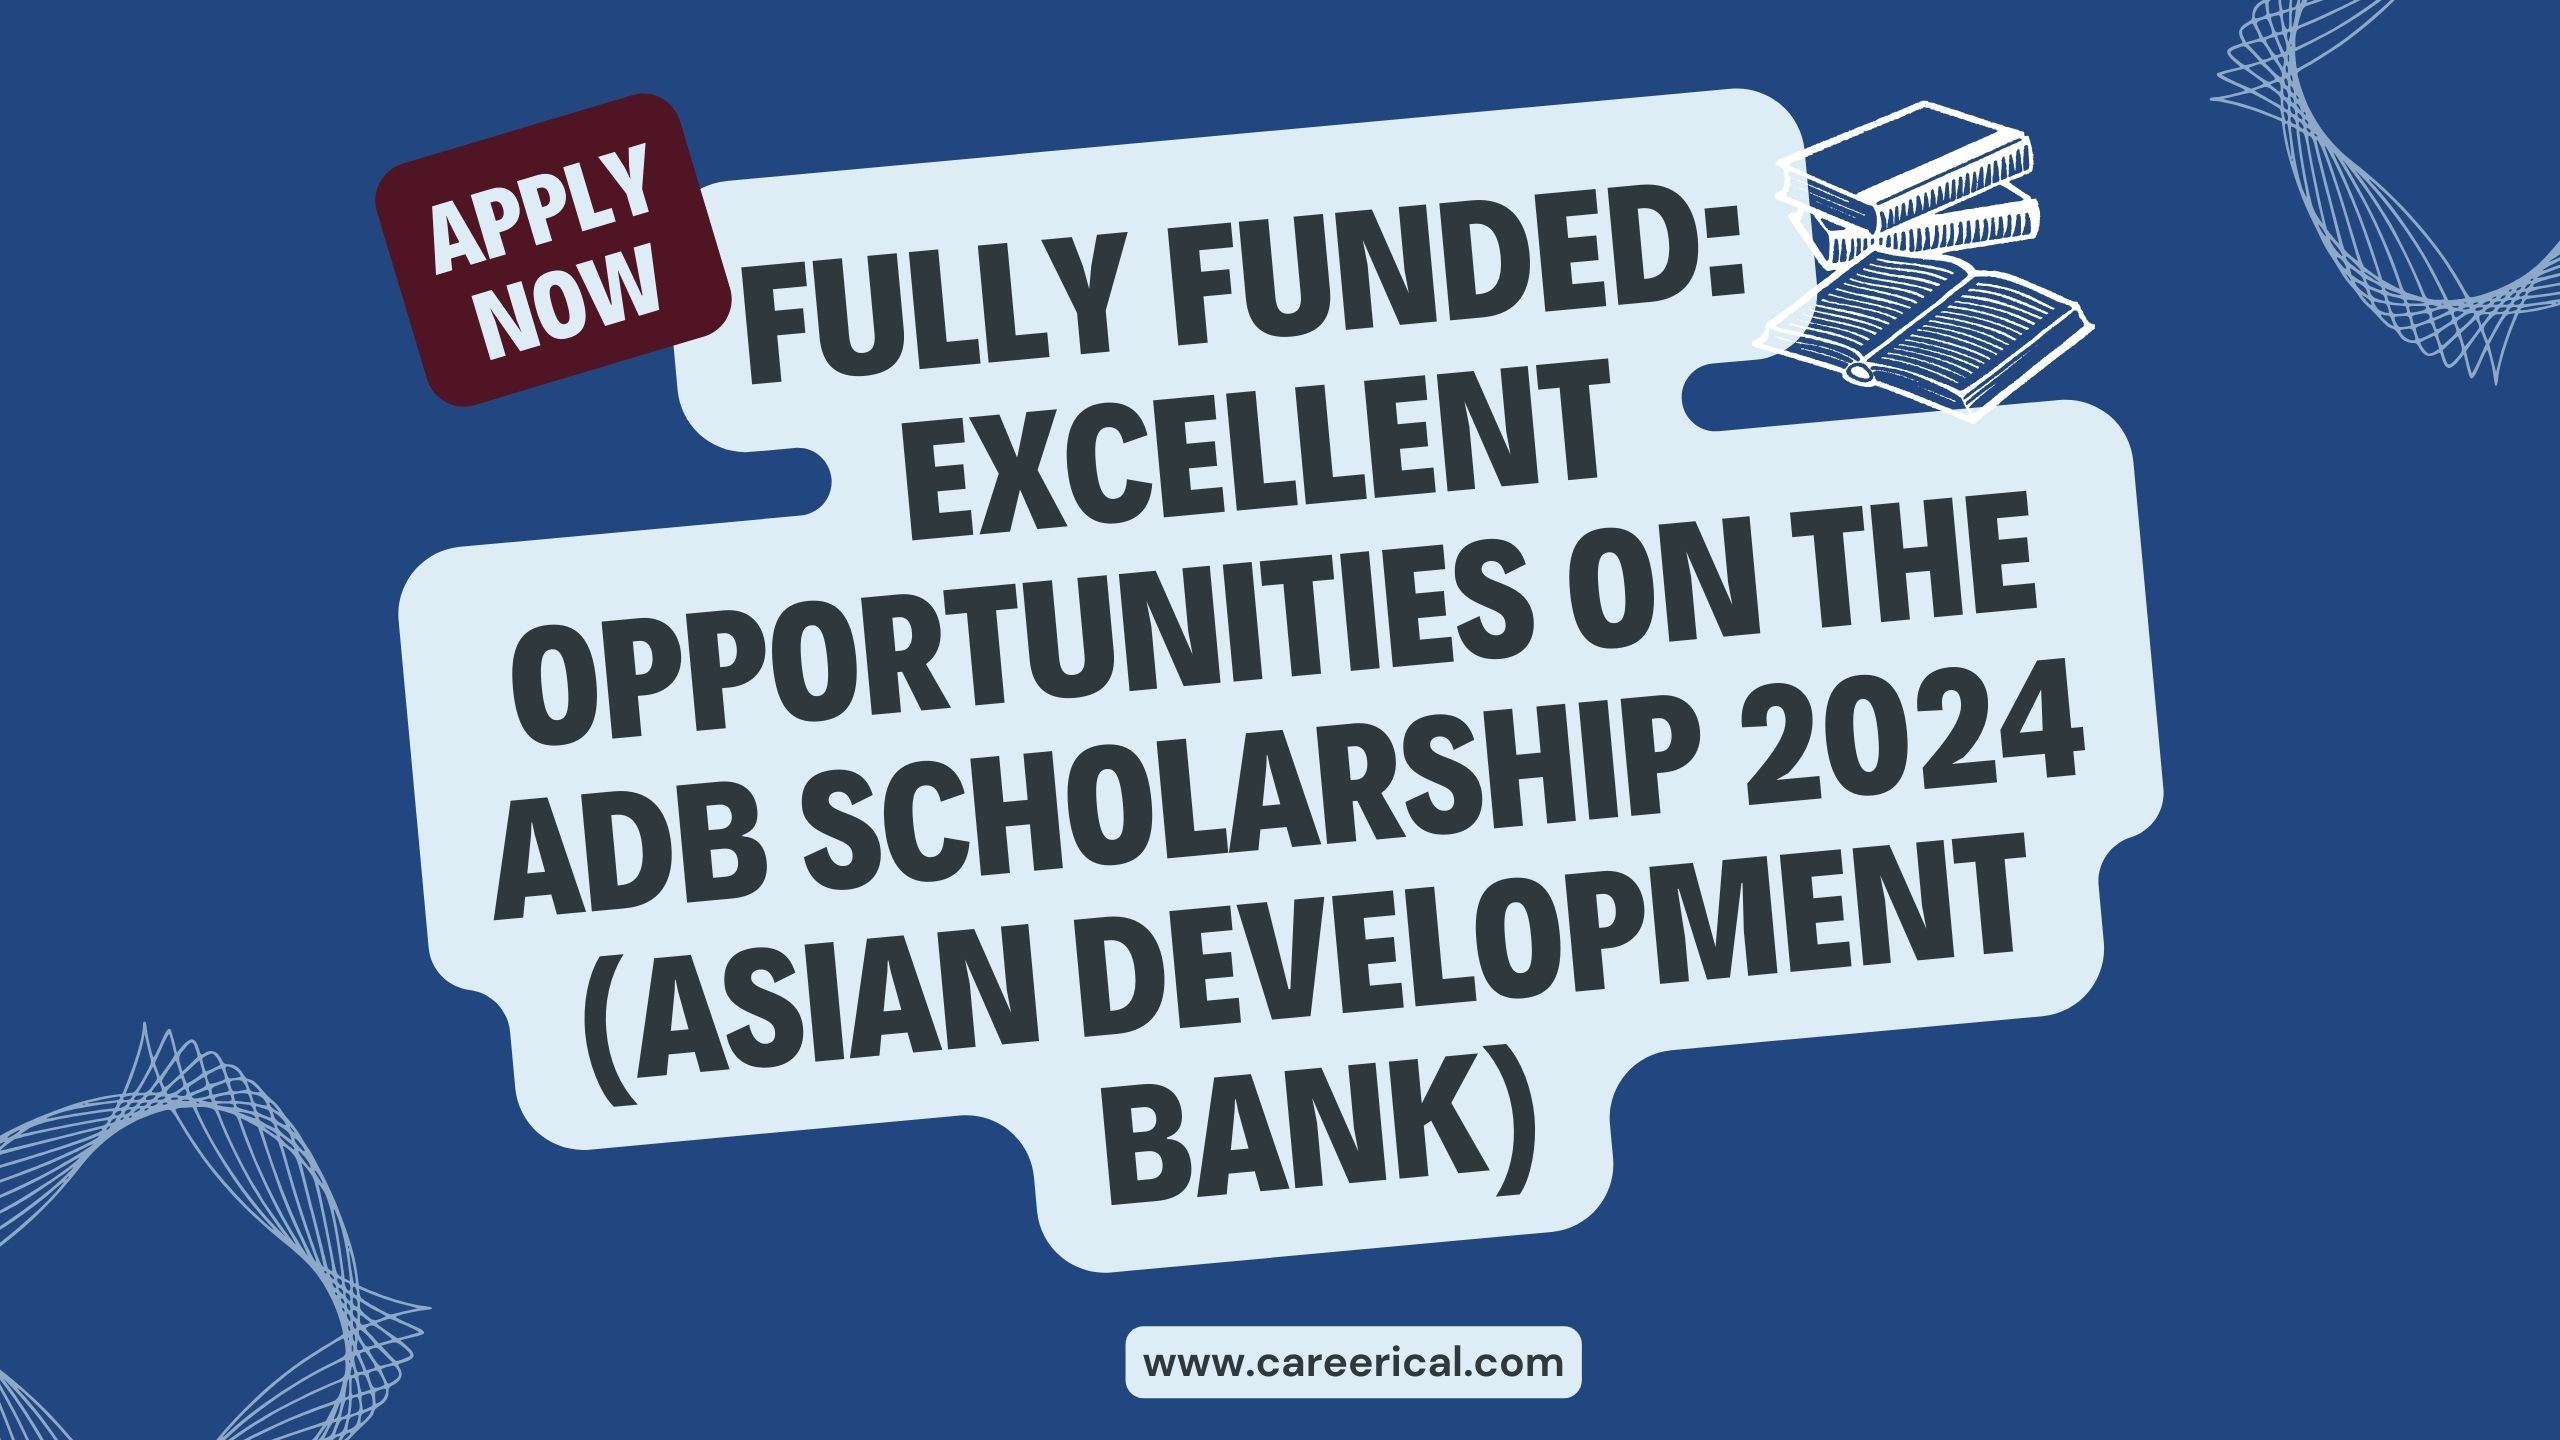 Fully Funded Excellent Opportunities on the ADB Scholarship 2024 (Asian Development Bank)